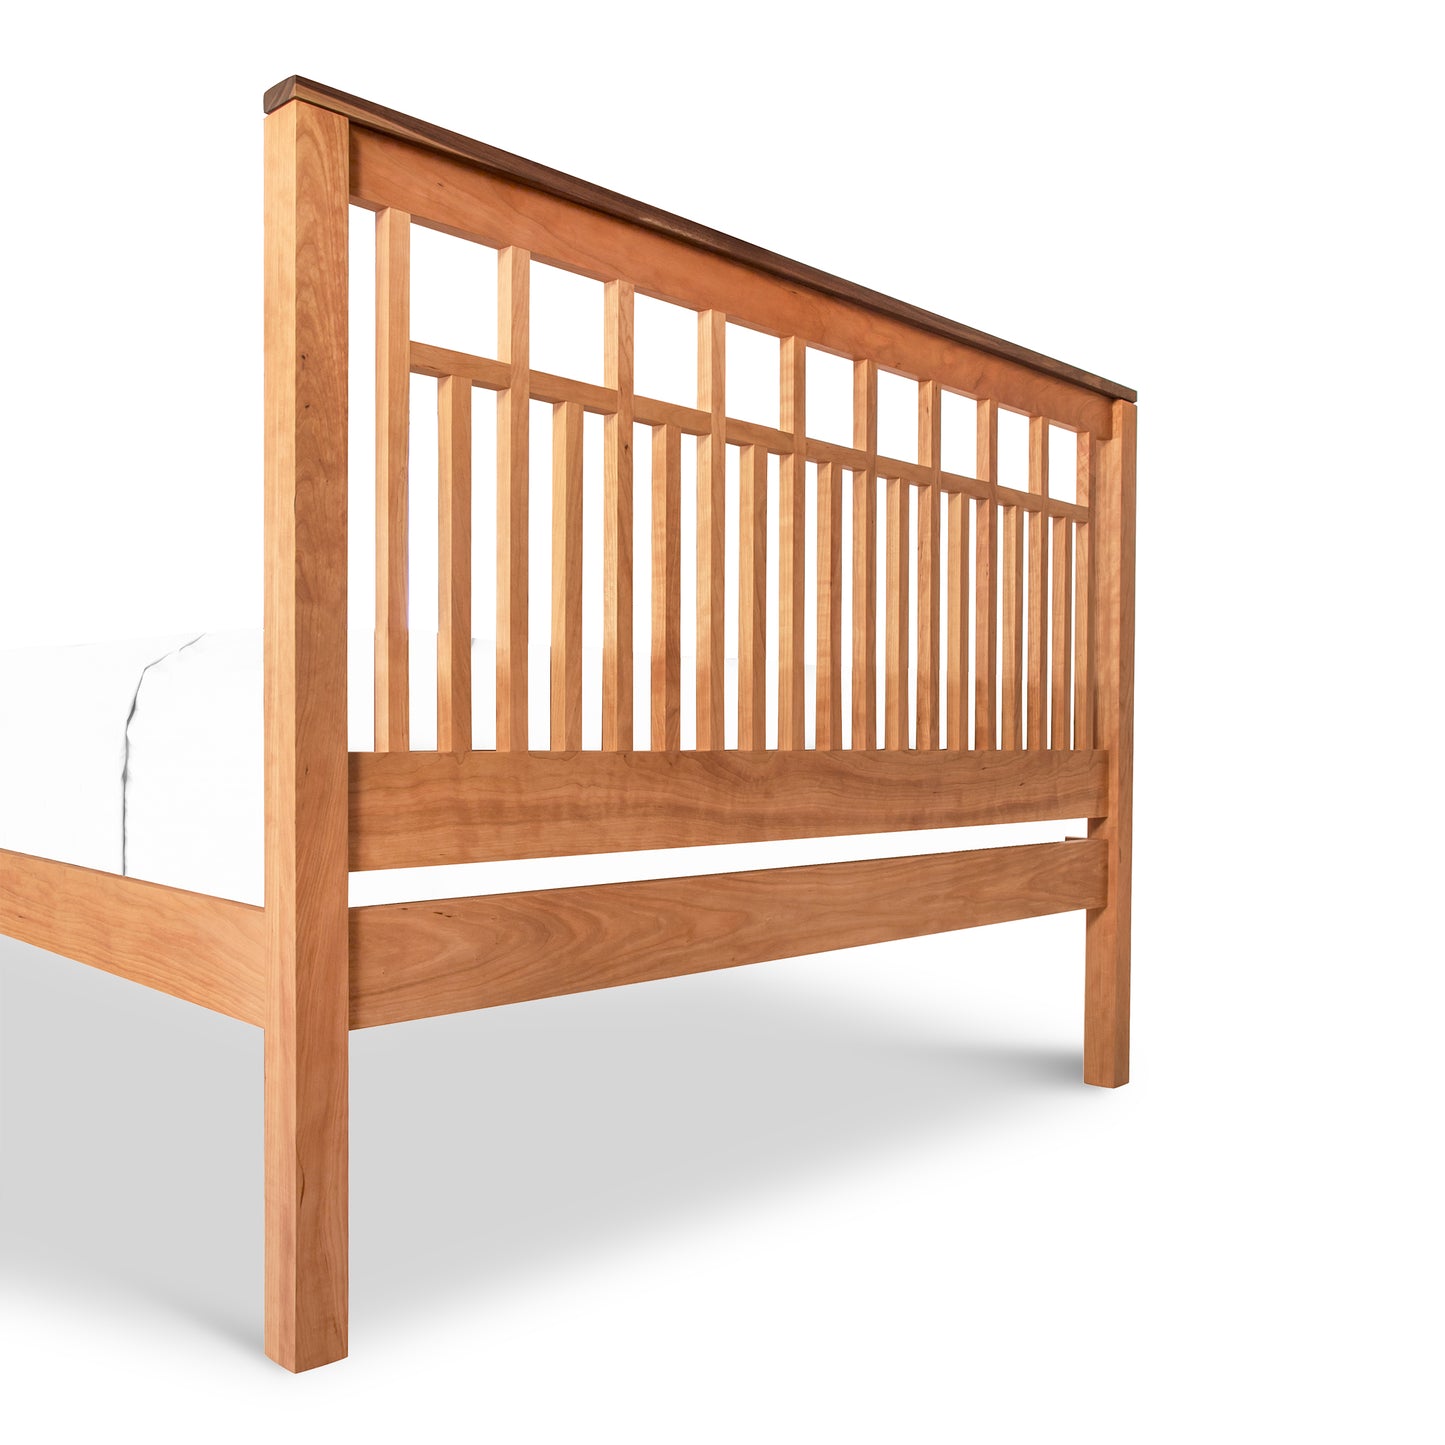 Vermont Furniture Designs' Modern American Trellis Bed with an eco-friendly finish, isolated on a white background.